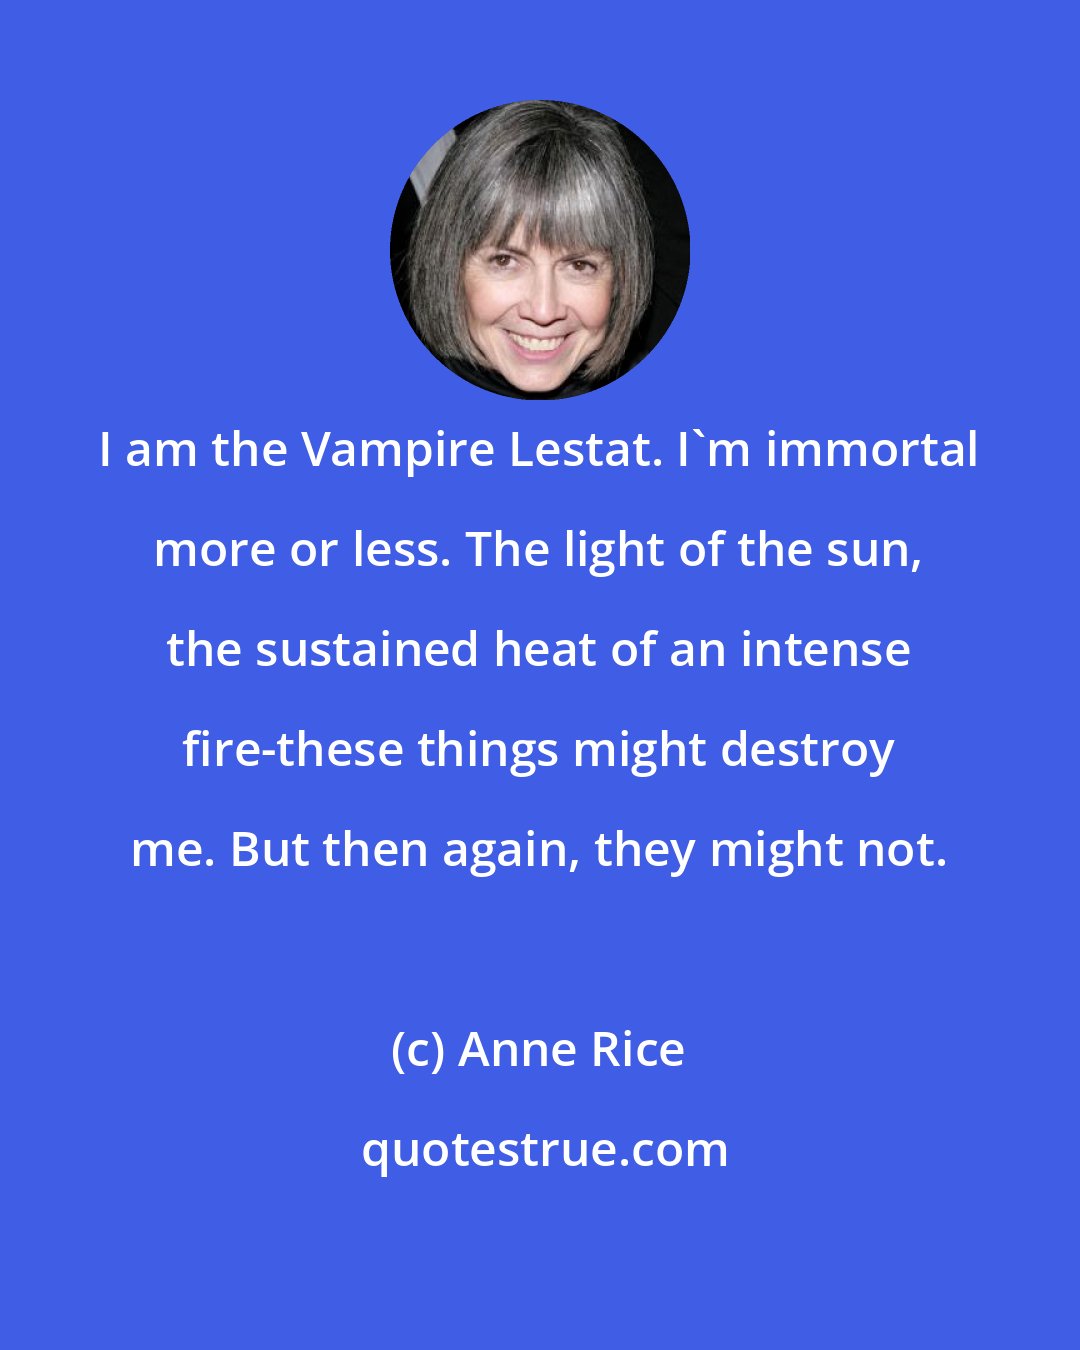 Anne Rice: I am the Vampire Lestat. I'm immortal more or less. The light of the sun, the sustained heat of an intense fire-these things might destroy me. But then again, they might not.